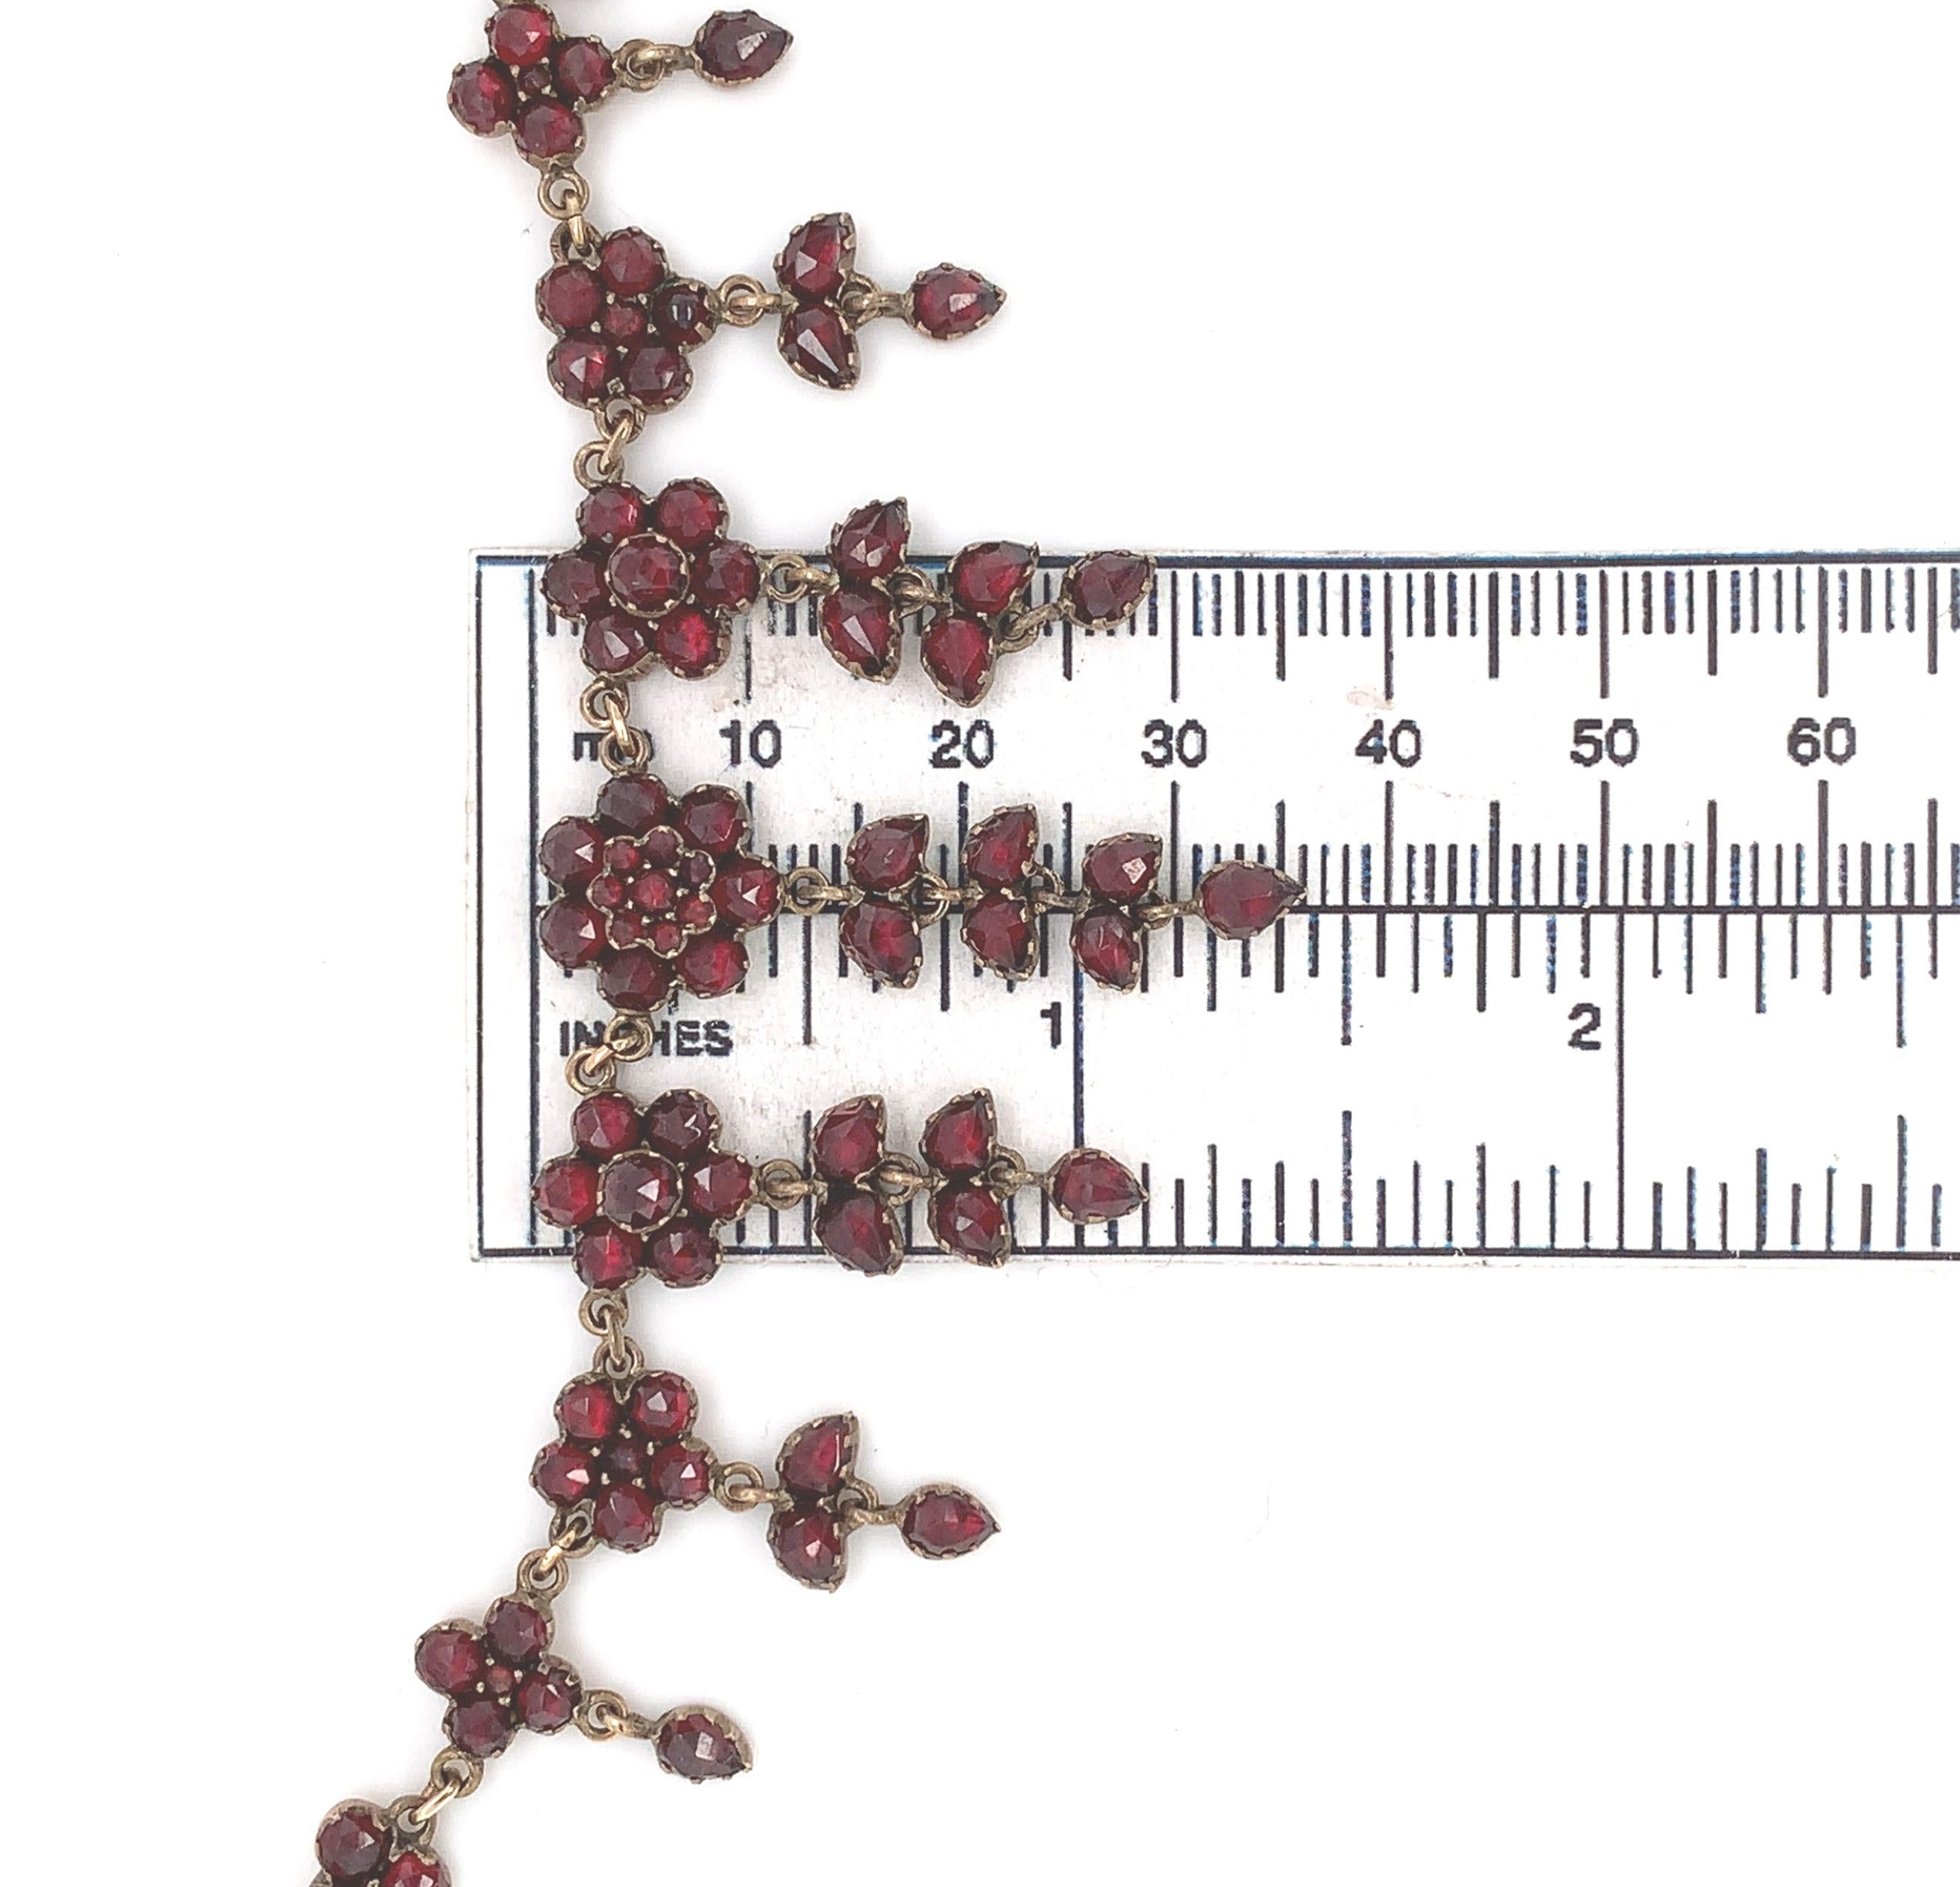 Bohemian Garnet Necklace with 7 drops  For Sale 2